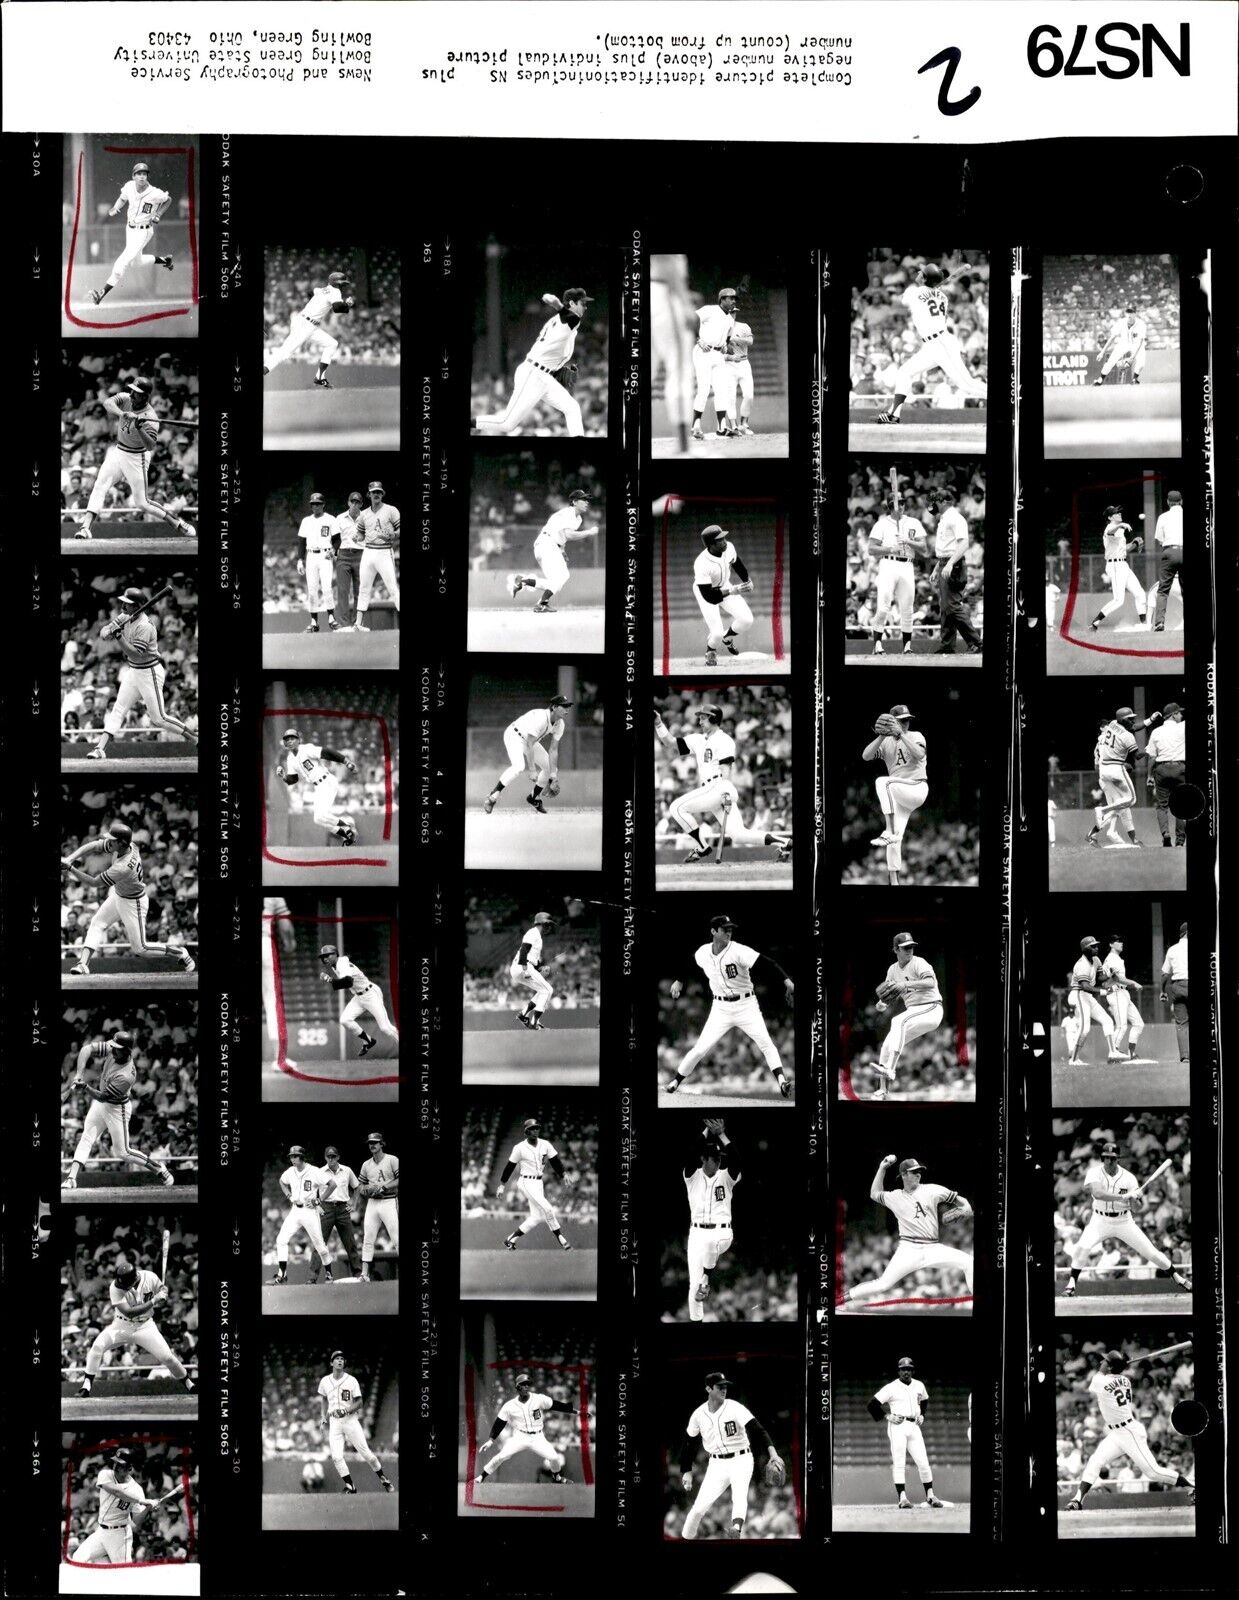 LD323 1979 Orig Contact Sheet Photo CHAMP SUMMERS DETROIT TIGERS - OAKLAND A'S